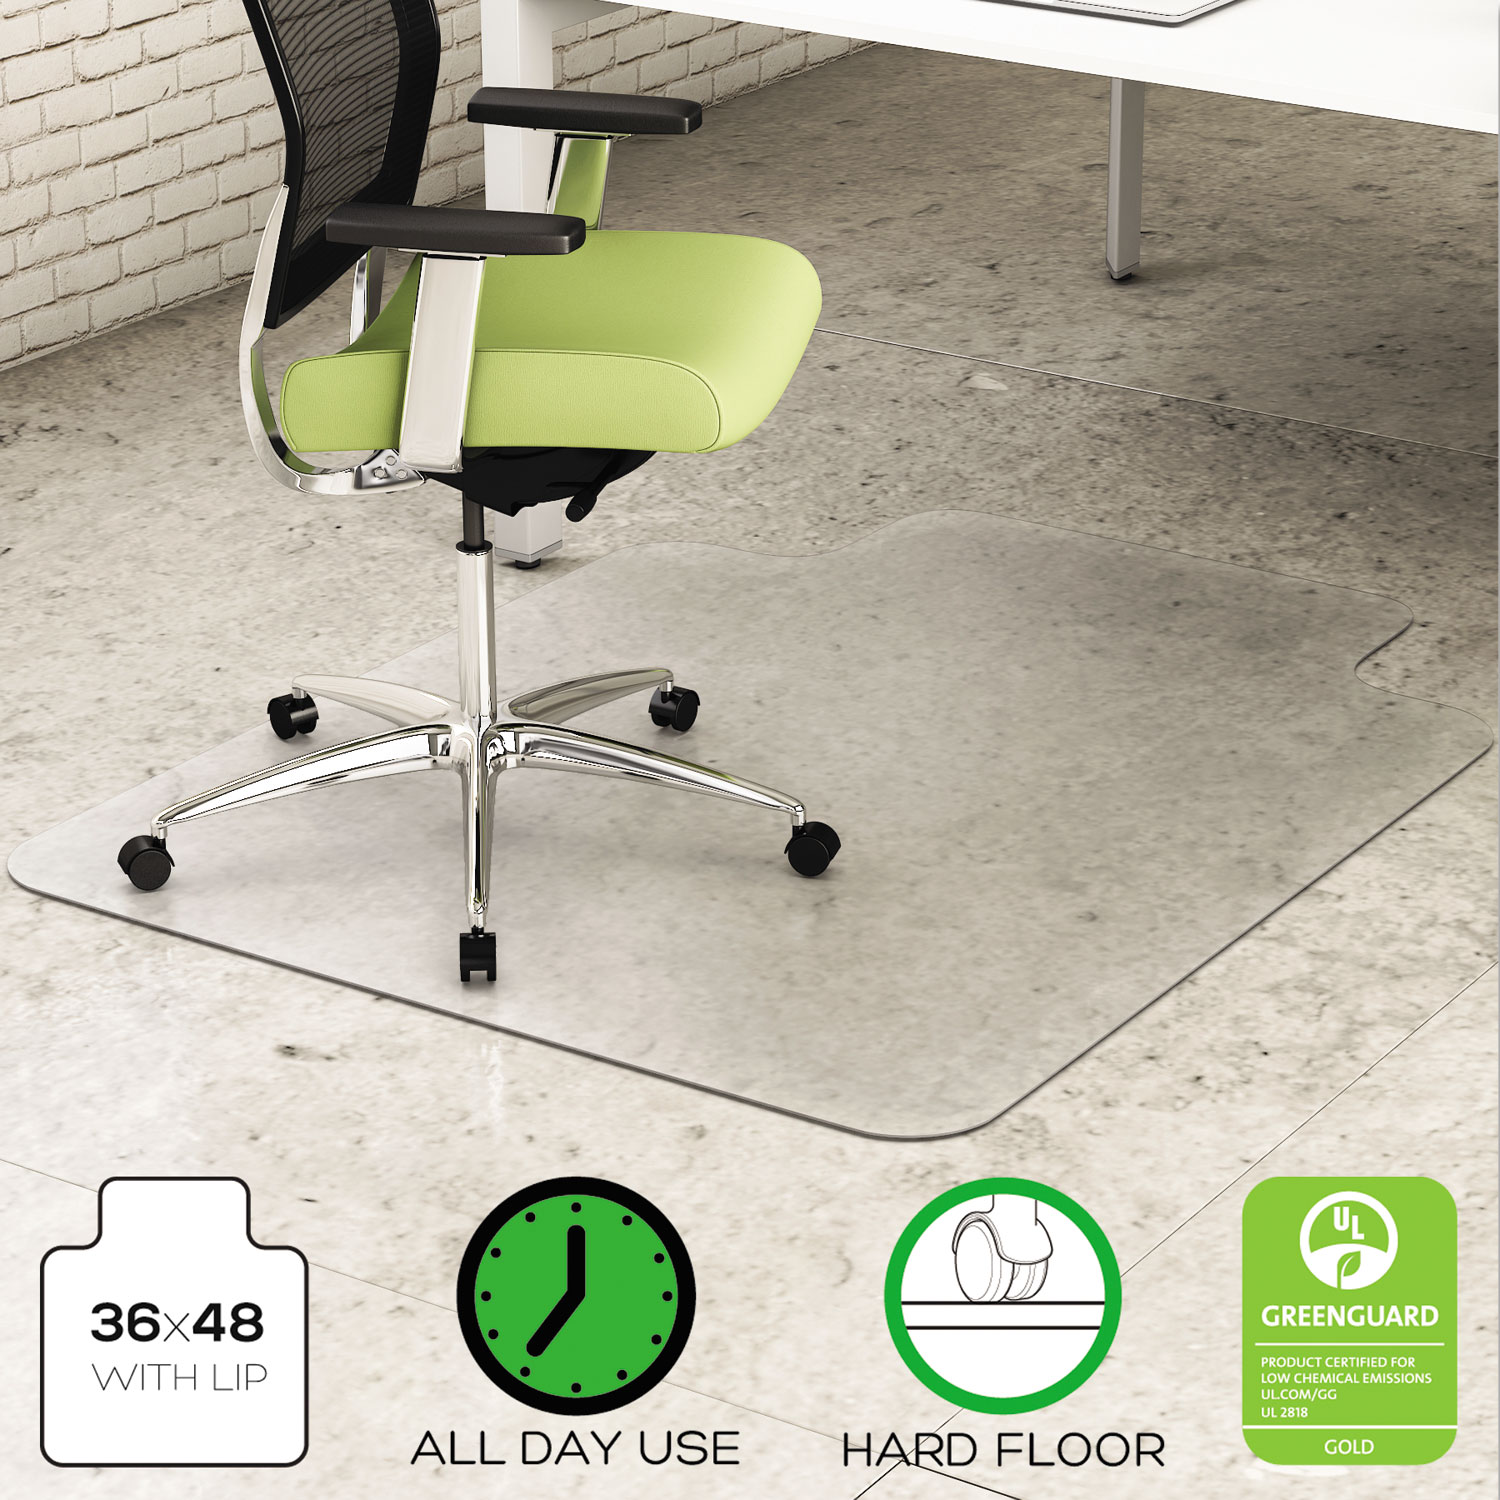  deflecto CM2G112PET EnvironMat All Day Use Chair Mat for Hard Floors, 36 x 48, Lipped, Clear (DEFCM2G112PET) 